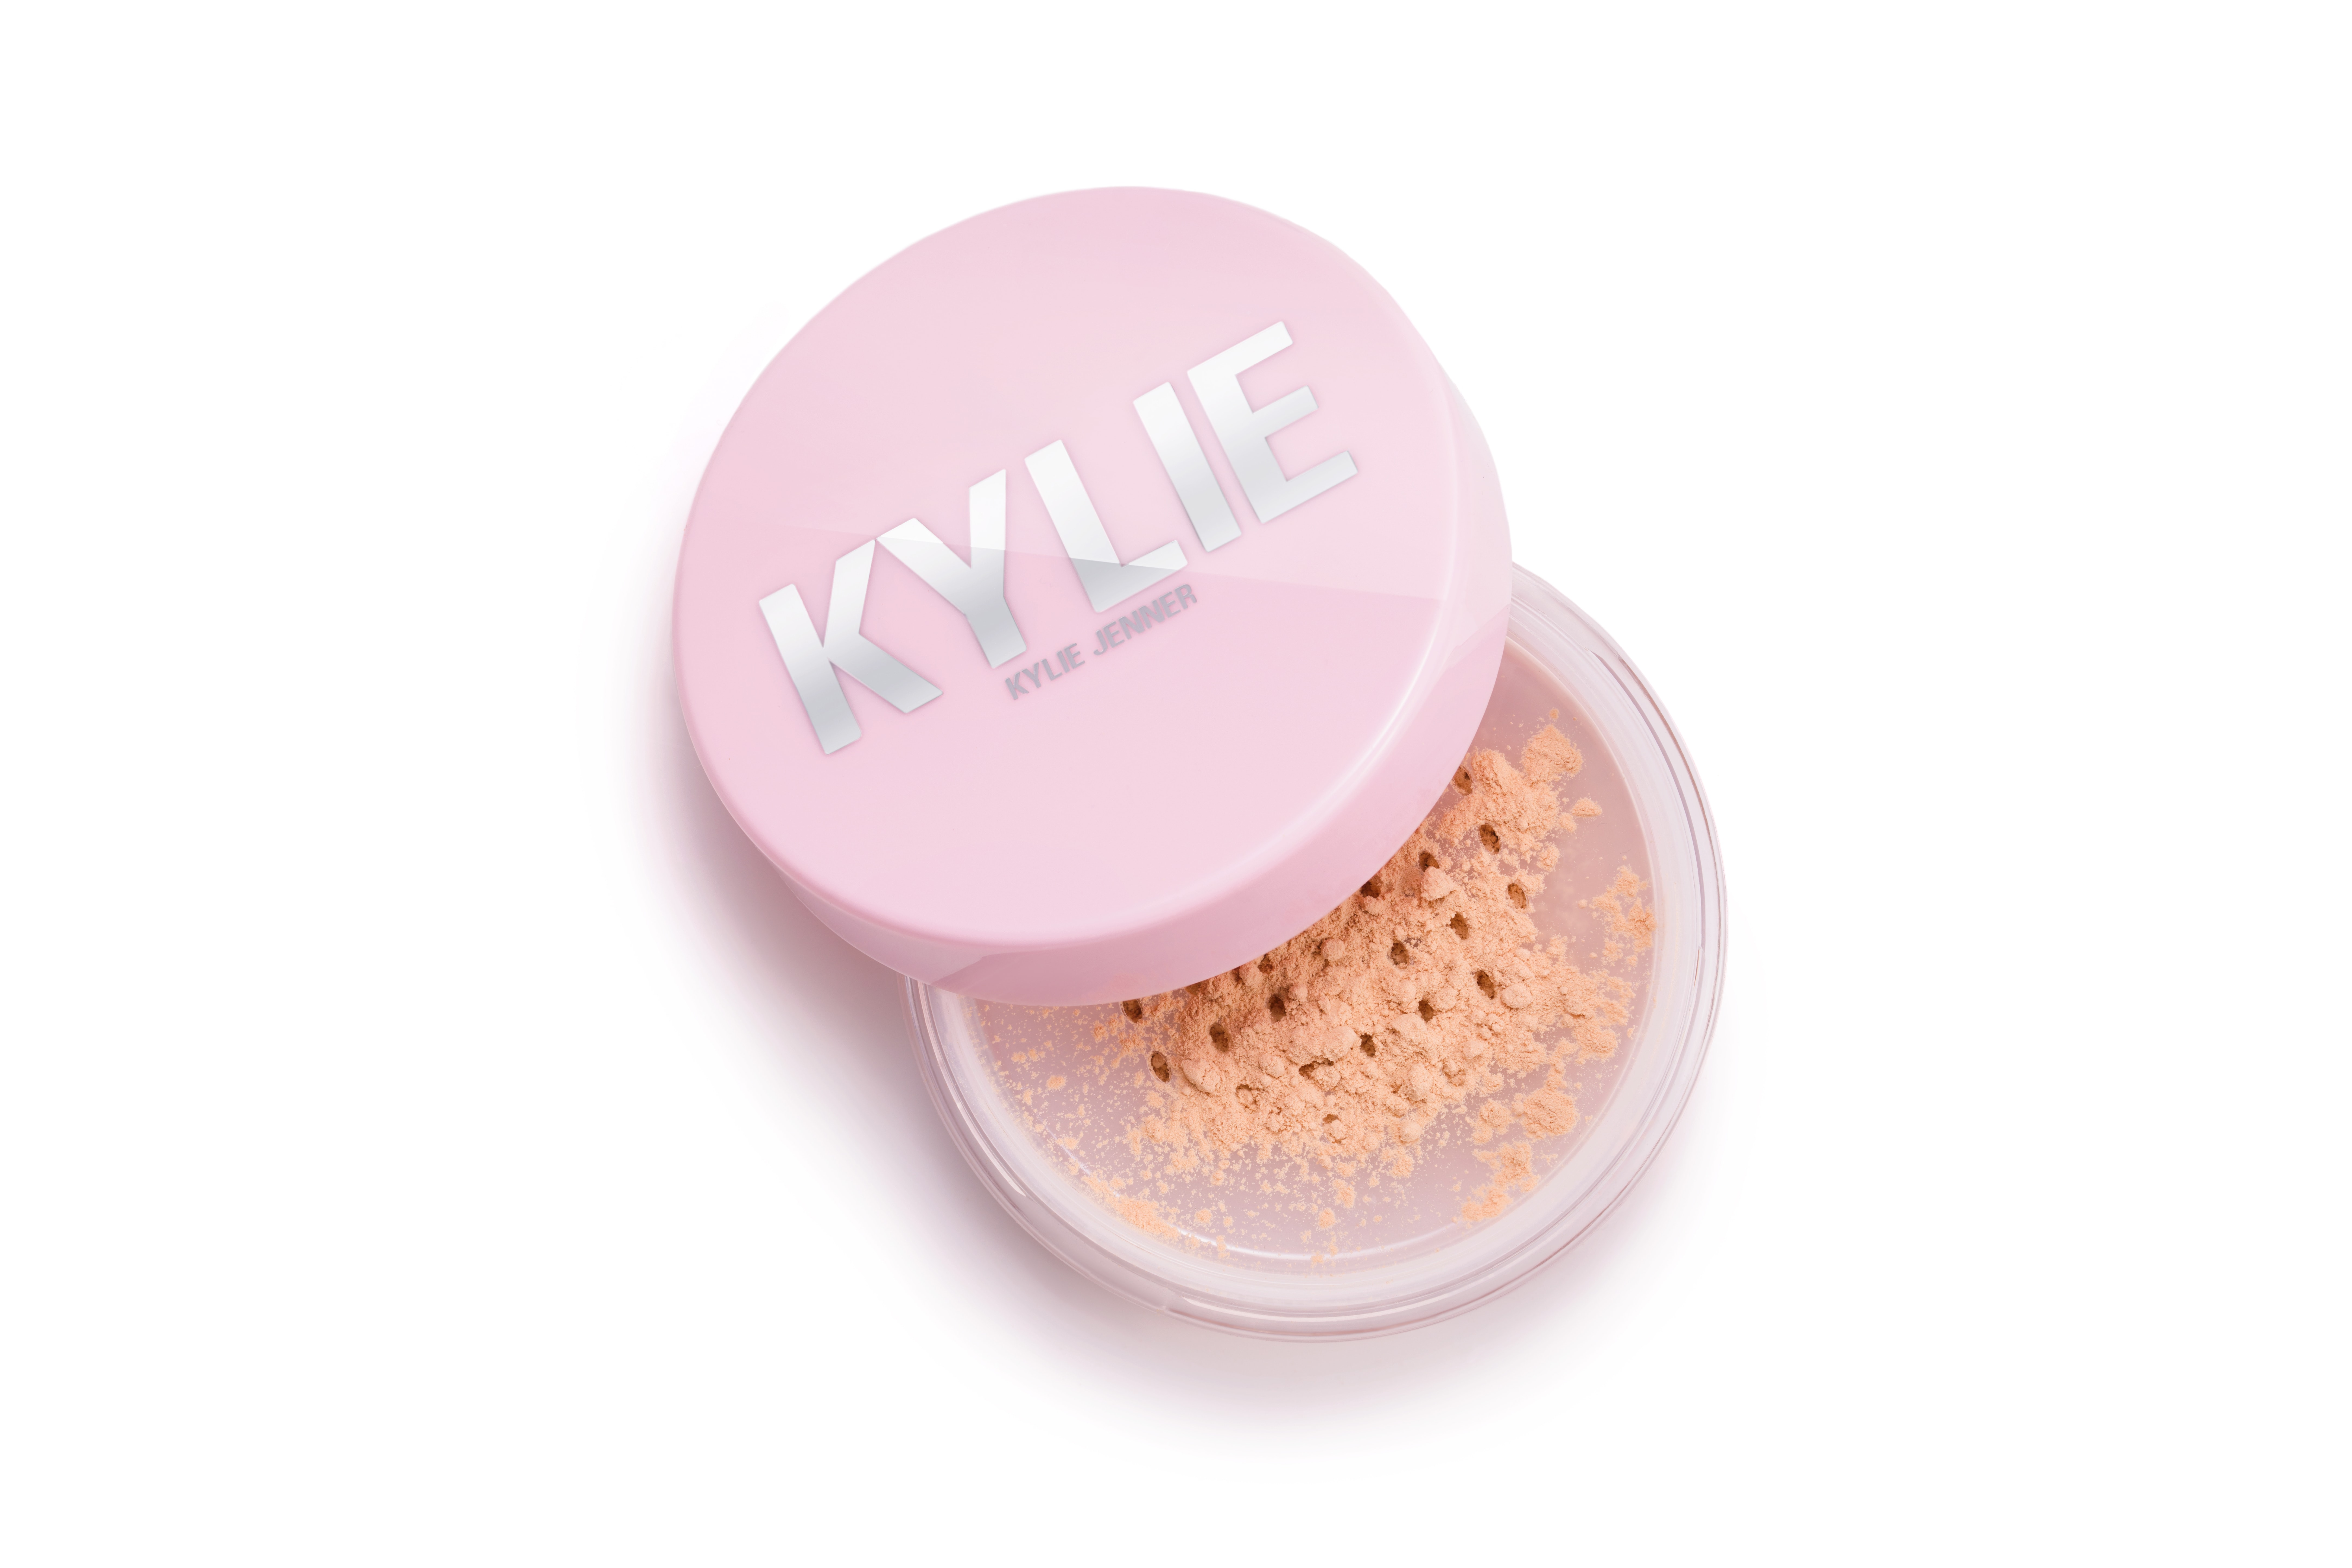 Kylie Jenner Launchest Kylie Cosmetics Setting Powder Makeup Lipgloss Release Date